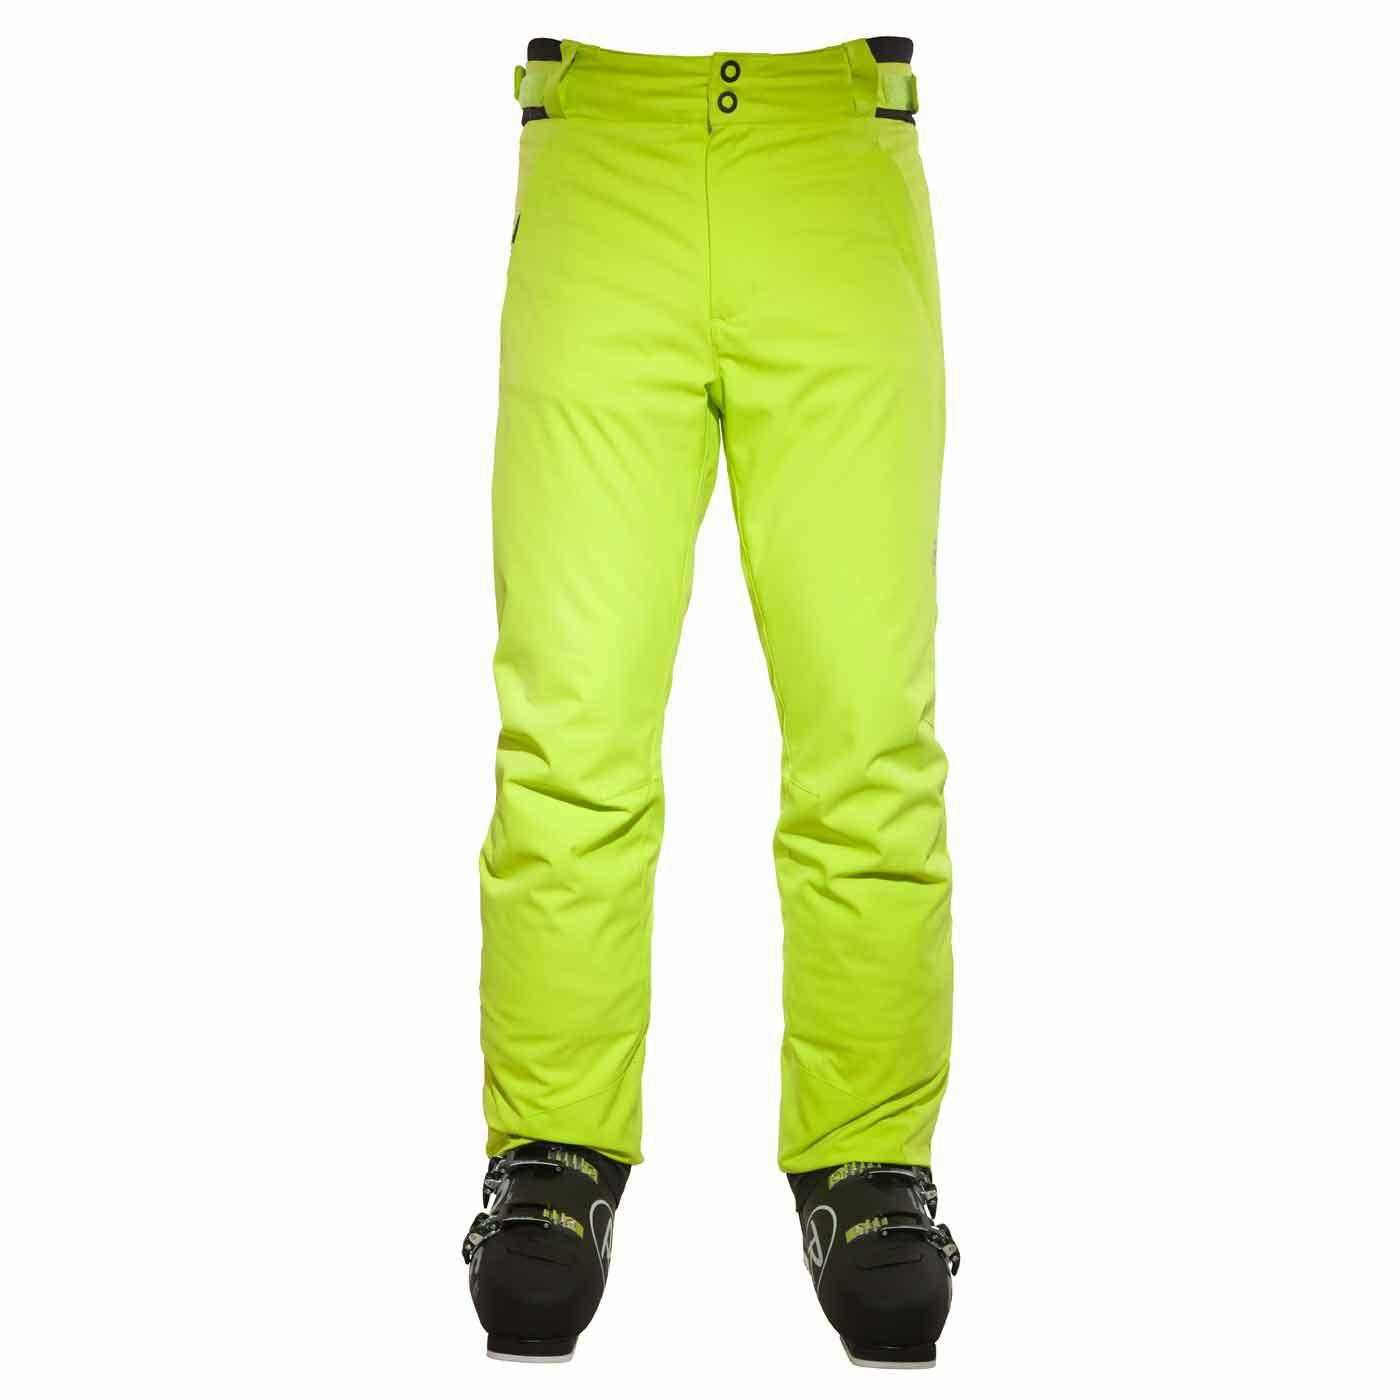 Velocity Pant - Punch Lime